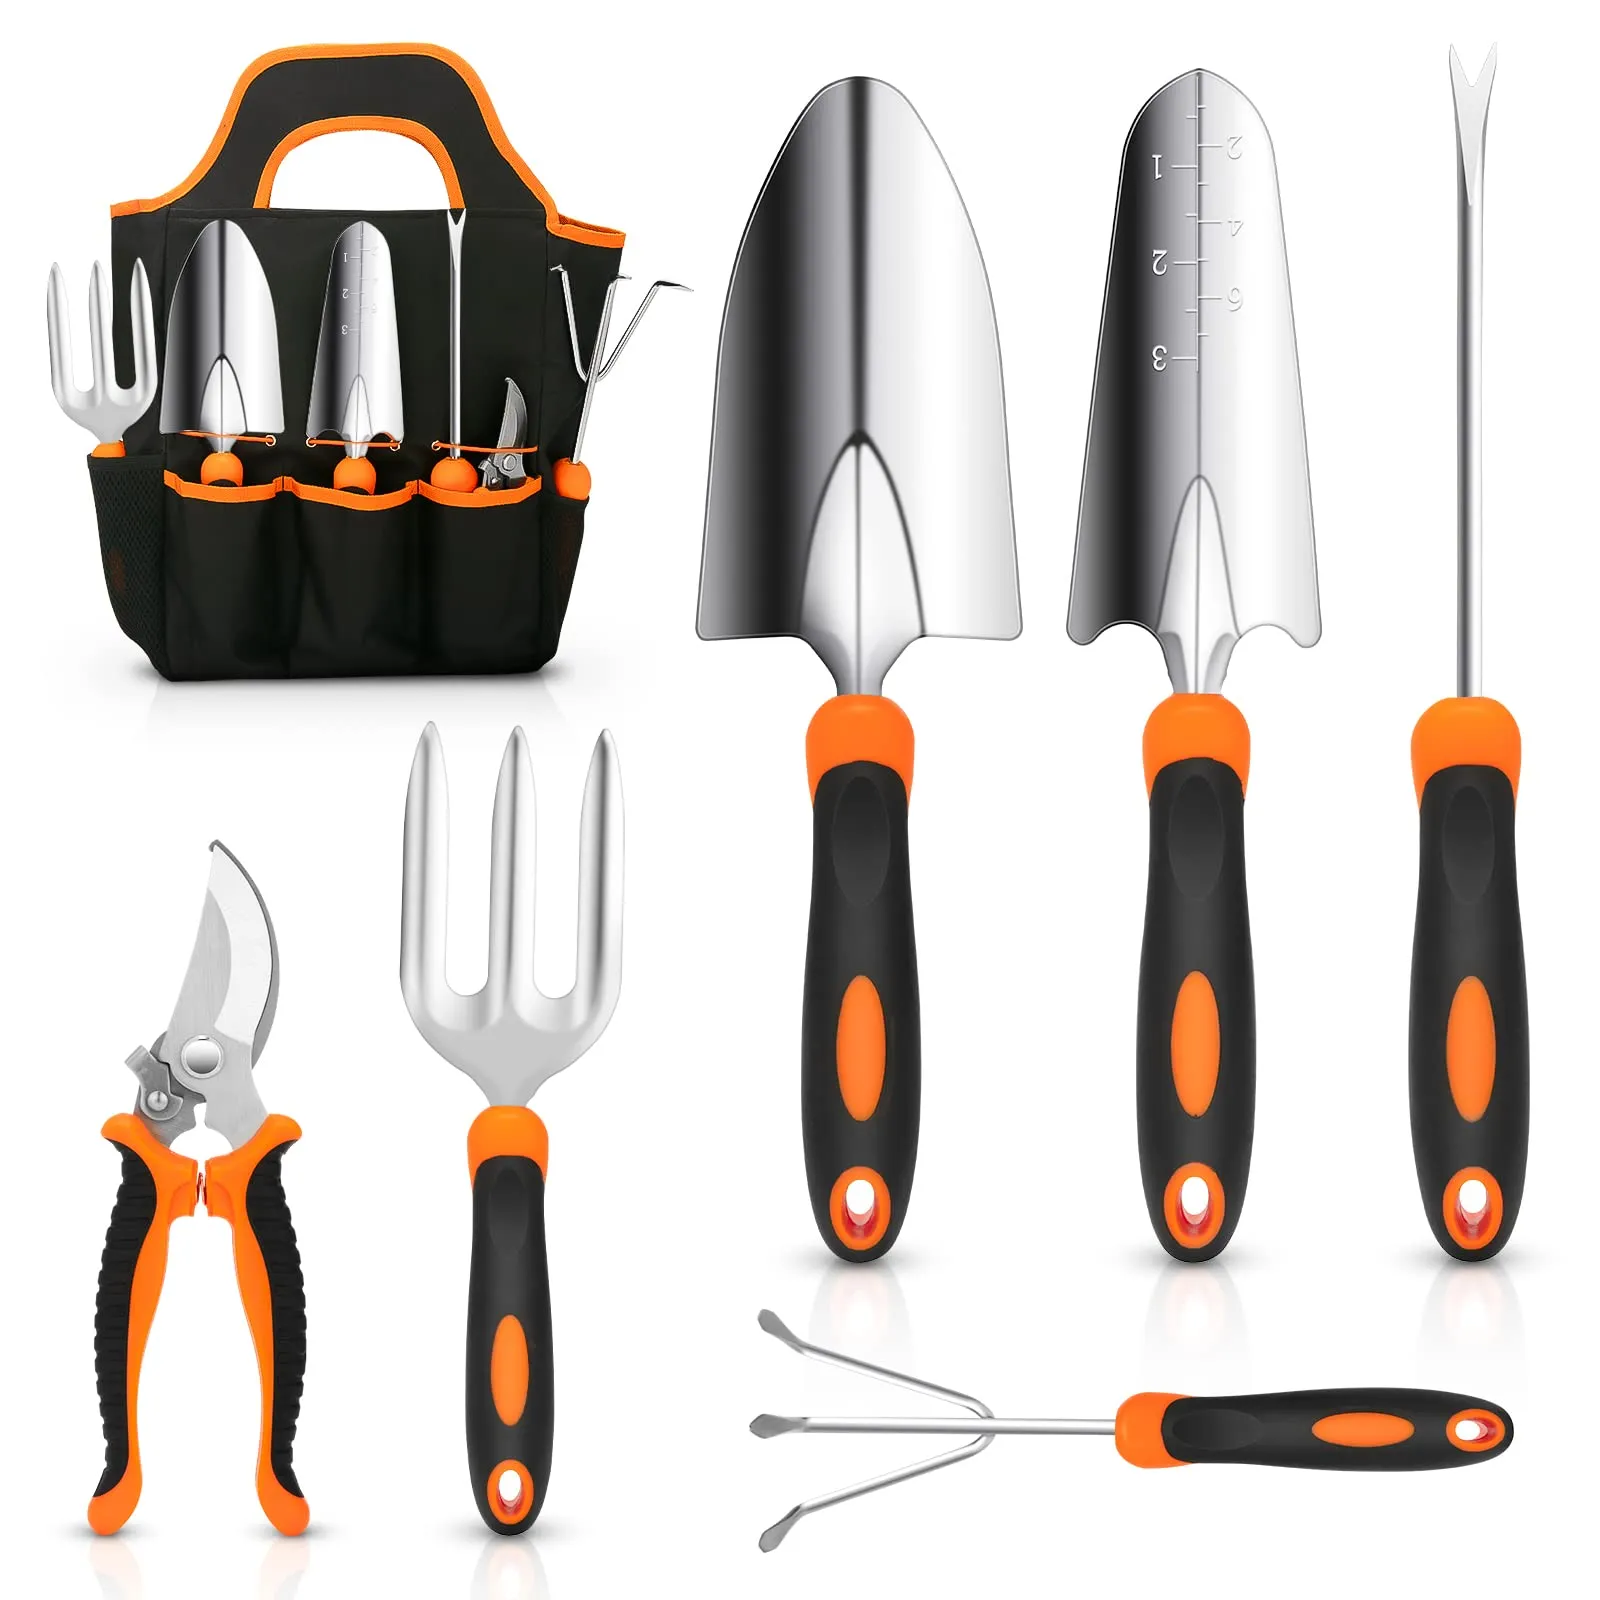 Yueuxuan Garden Tool Set Stainless Steel Heavy Duty Gardening repair kit with Non-Slip Rubber Grip Storage Tote Bag Outdoor Hand Tools Ideal Garden Tool Kit Gifts